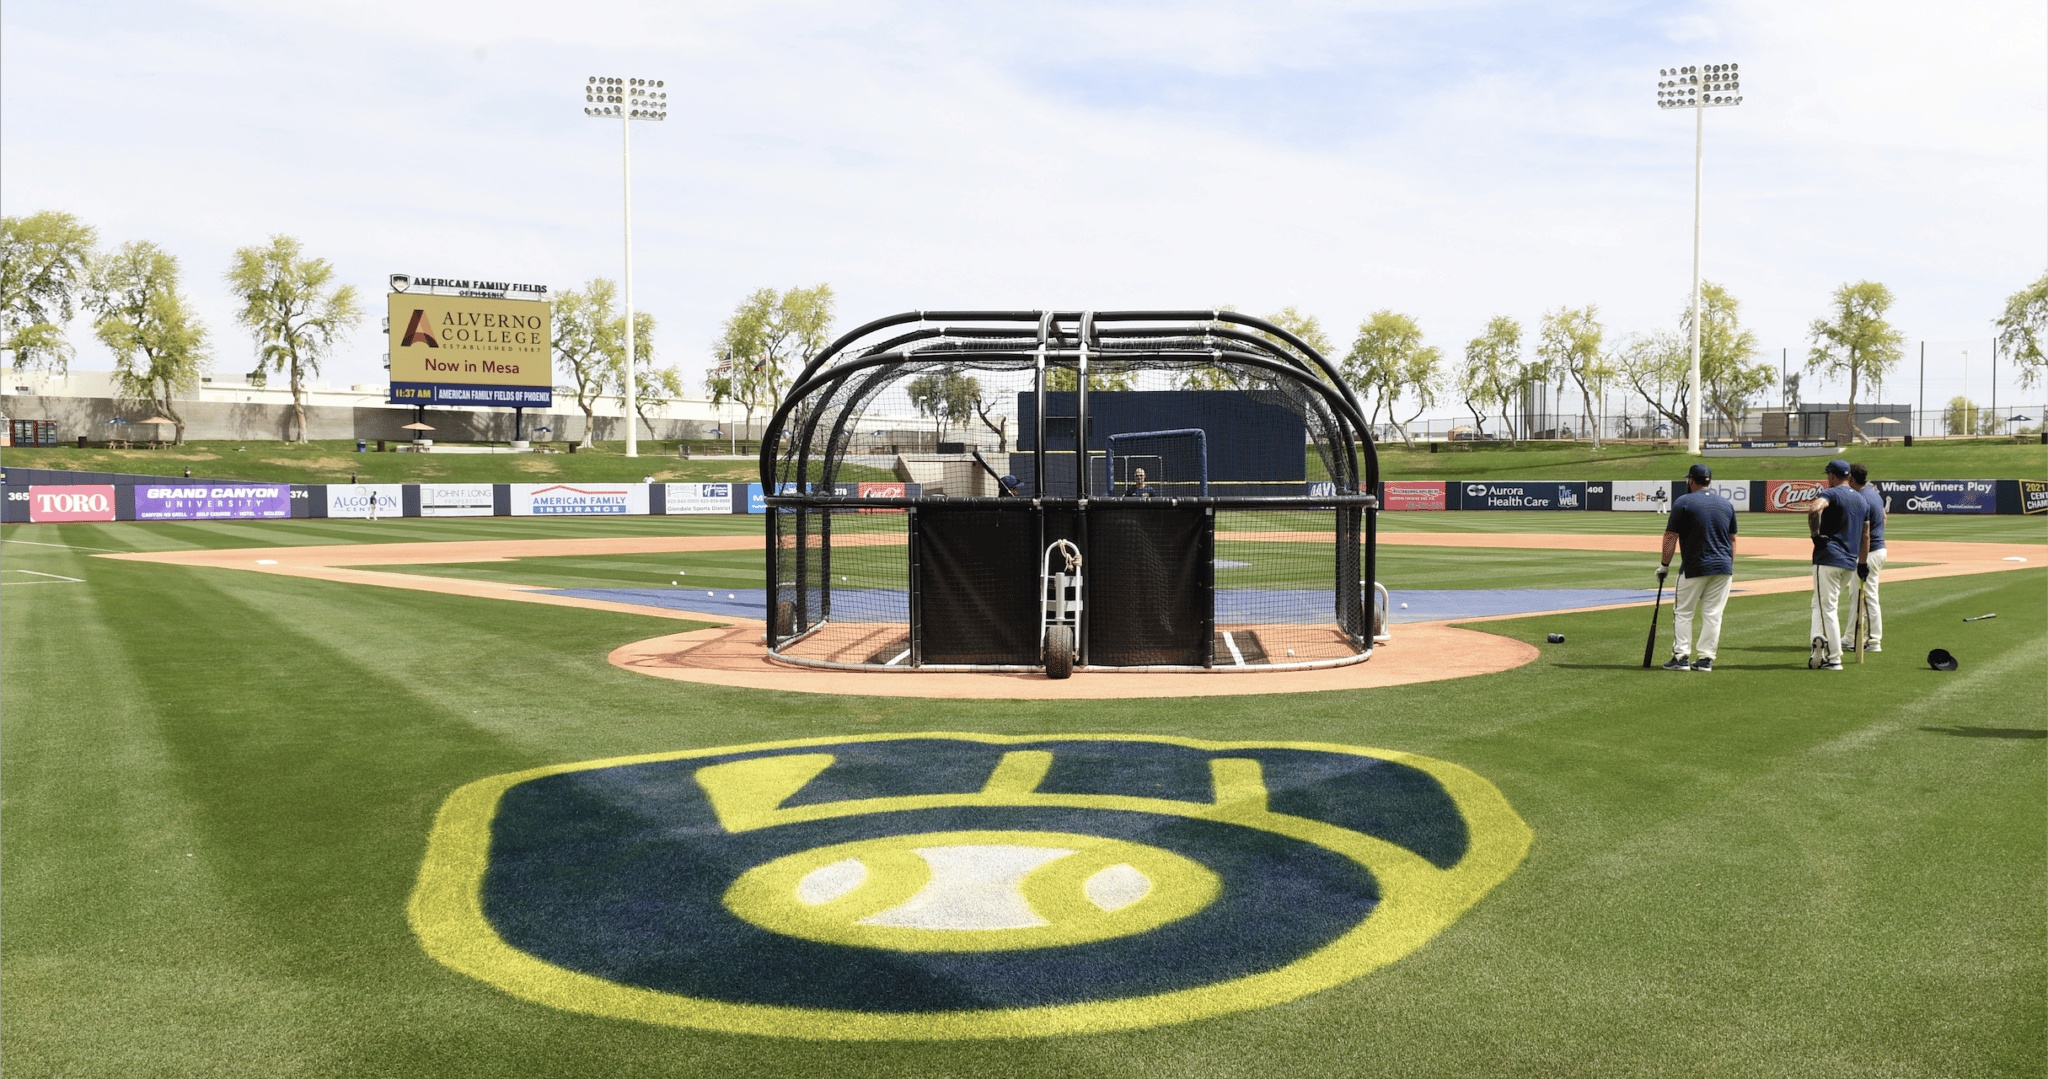 brewers spring training 2023